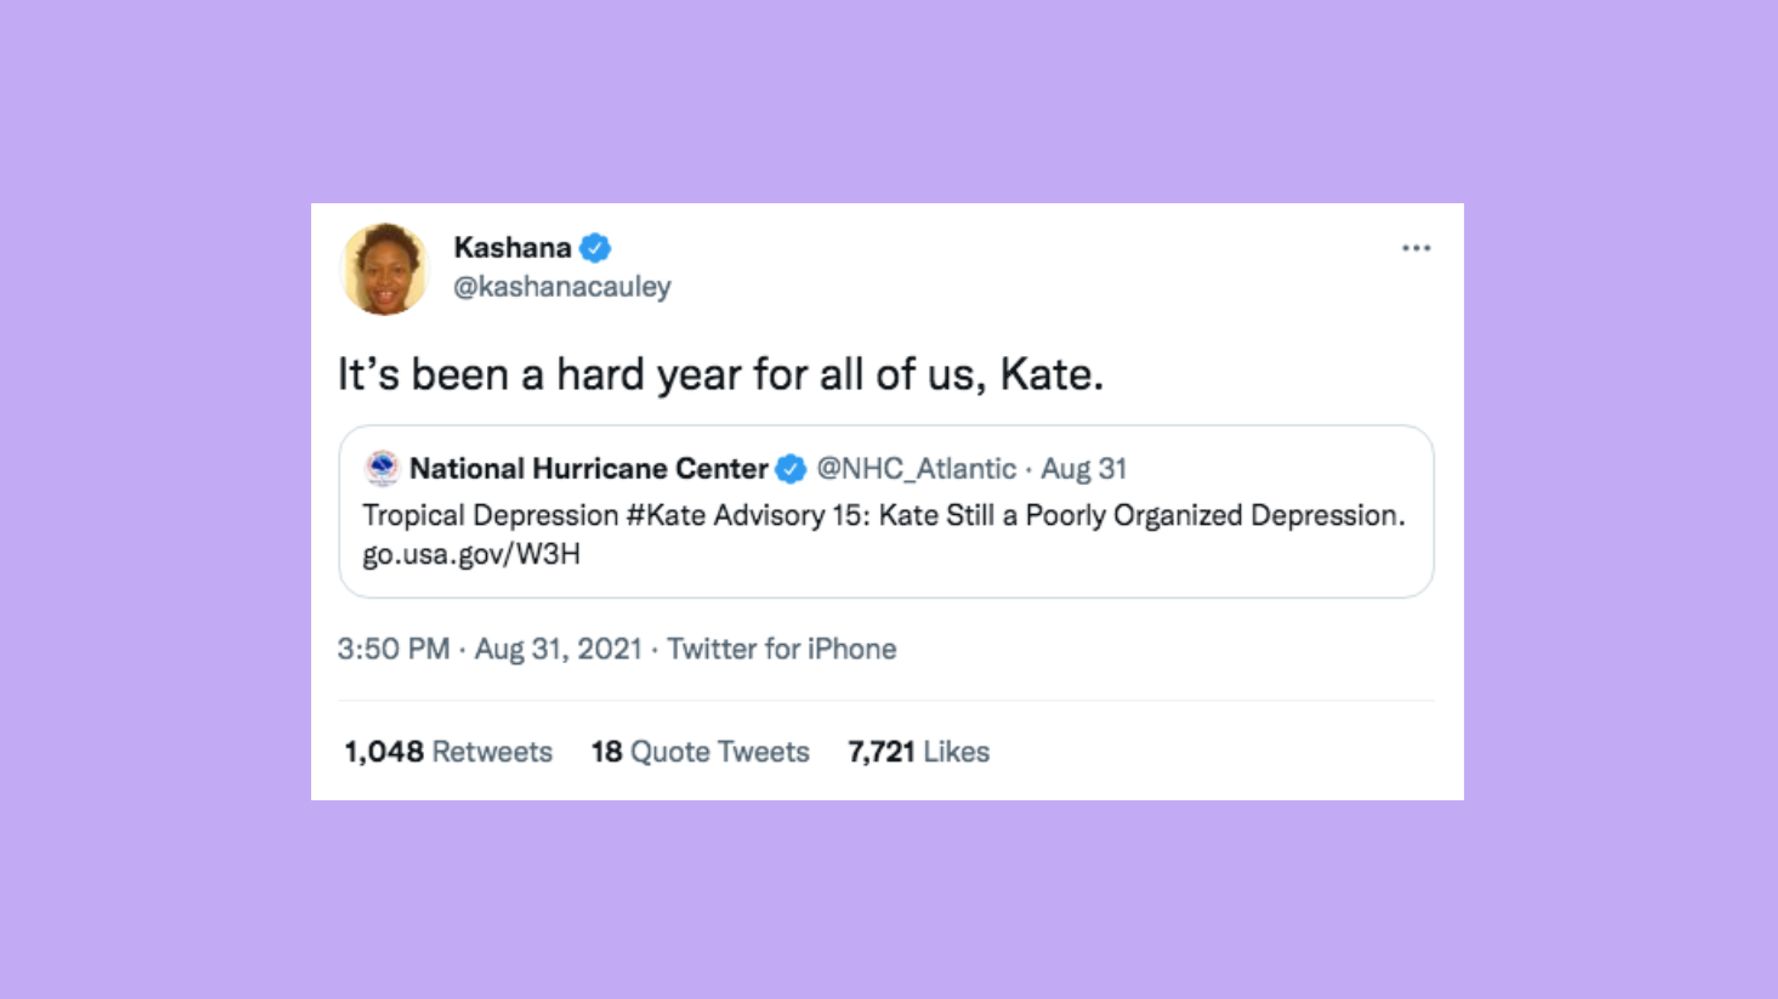 The 20 Funniest Tweets From Women This Week (Aug. 28-Sept. 3)